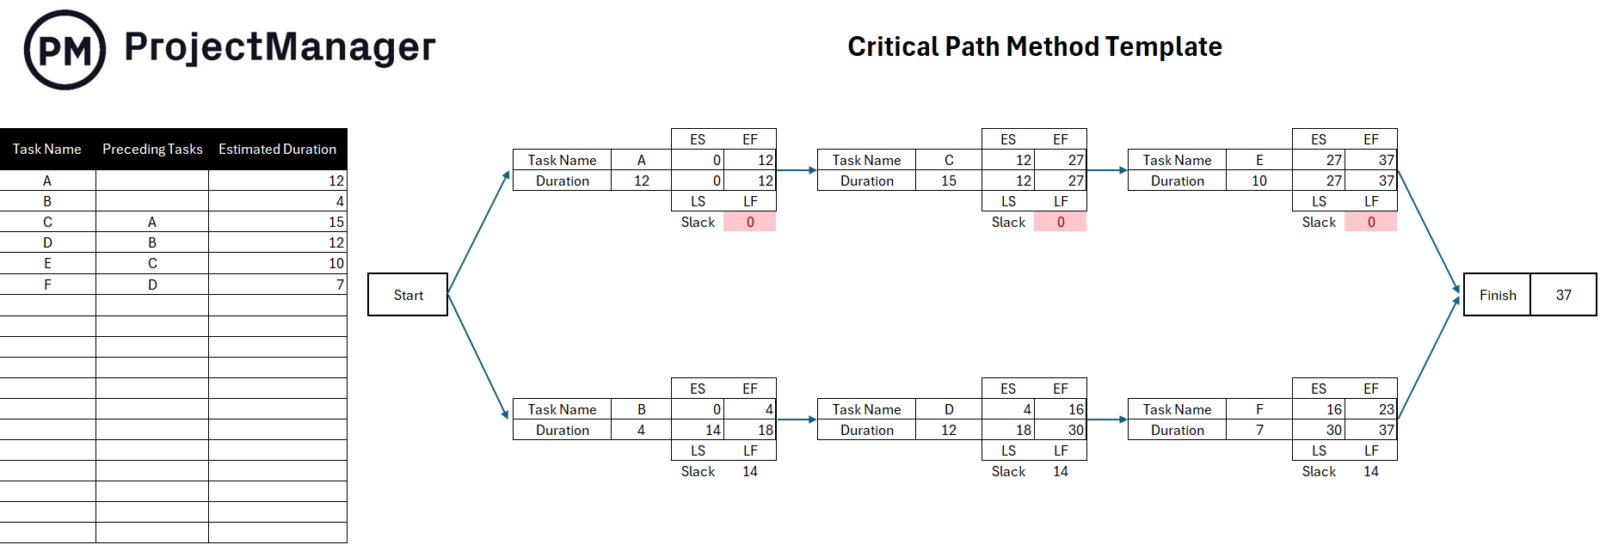 ProjectManager's critical path method template for Excel